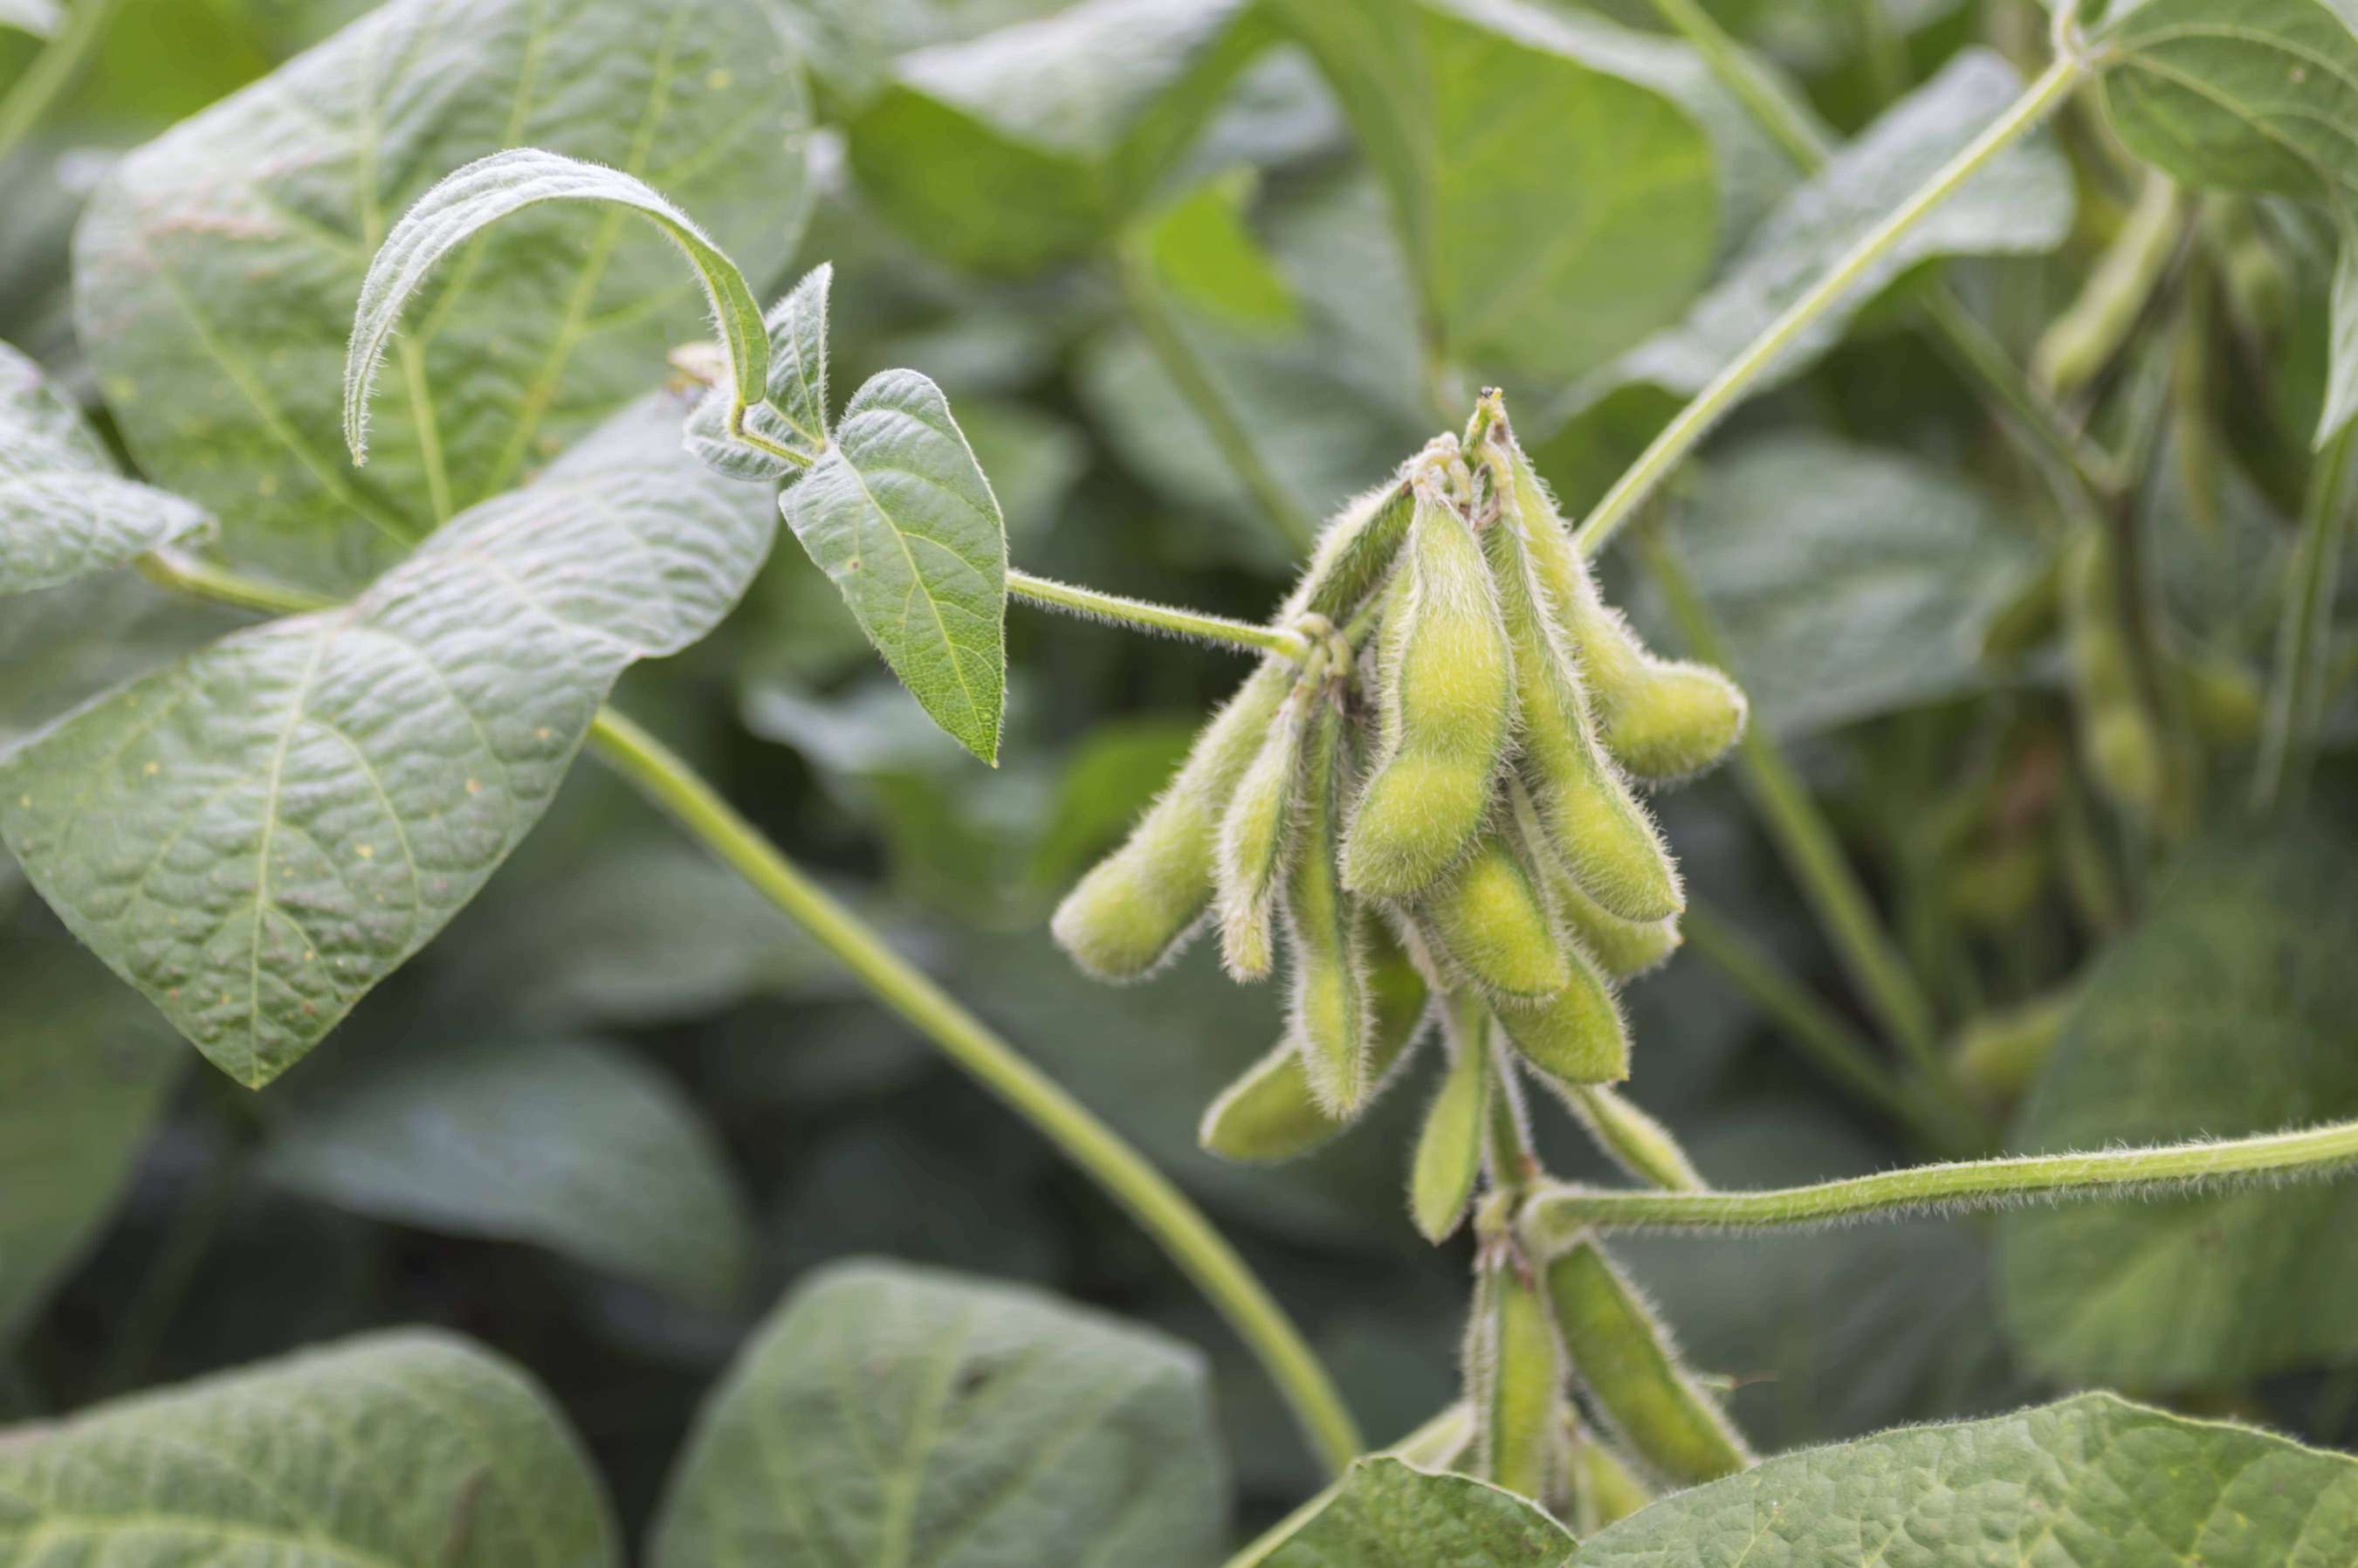 soybeans on a plant in a field.